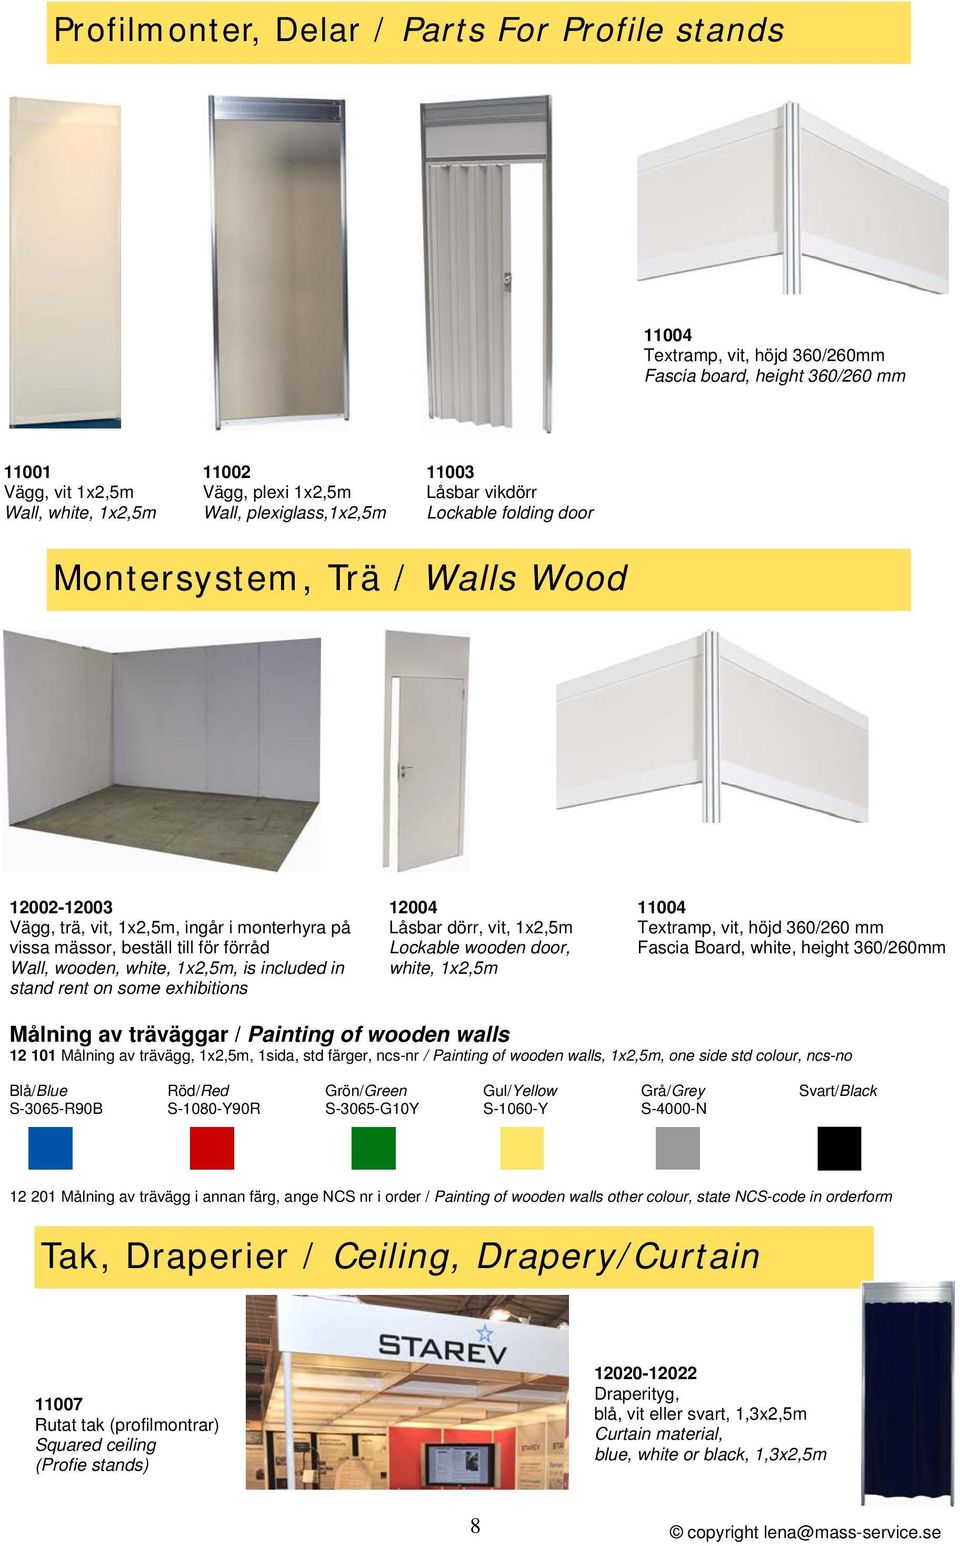 wooden, white, 1x2,5m, is included in stand rent on some exhibitions 12004 Låsbar dörr, vit, 1x2,5m Lockable wooden door, white, 1x2,5m 11004 Textramp, vit, höjd 360/260 mm Fascia Board, white,